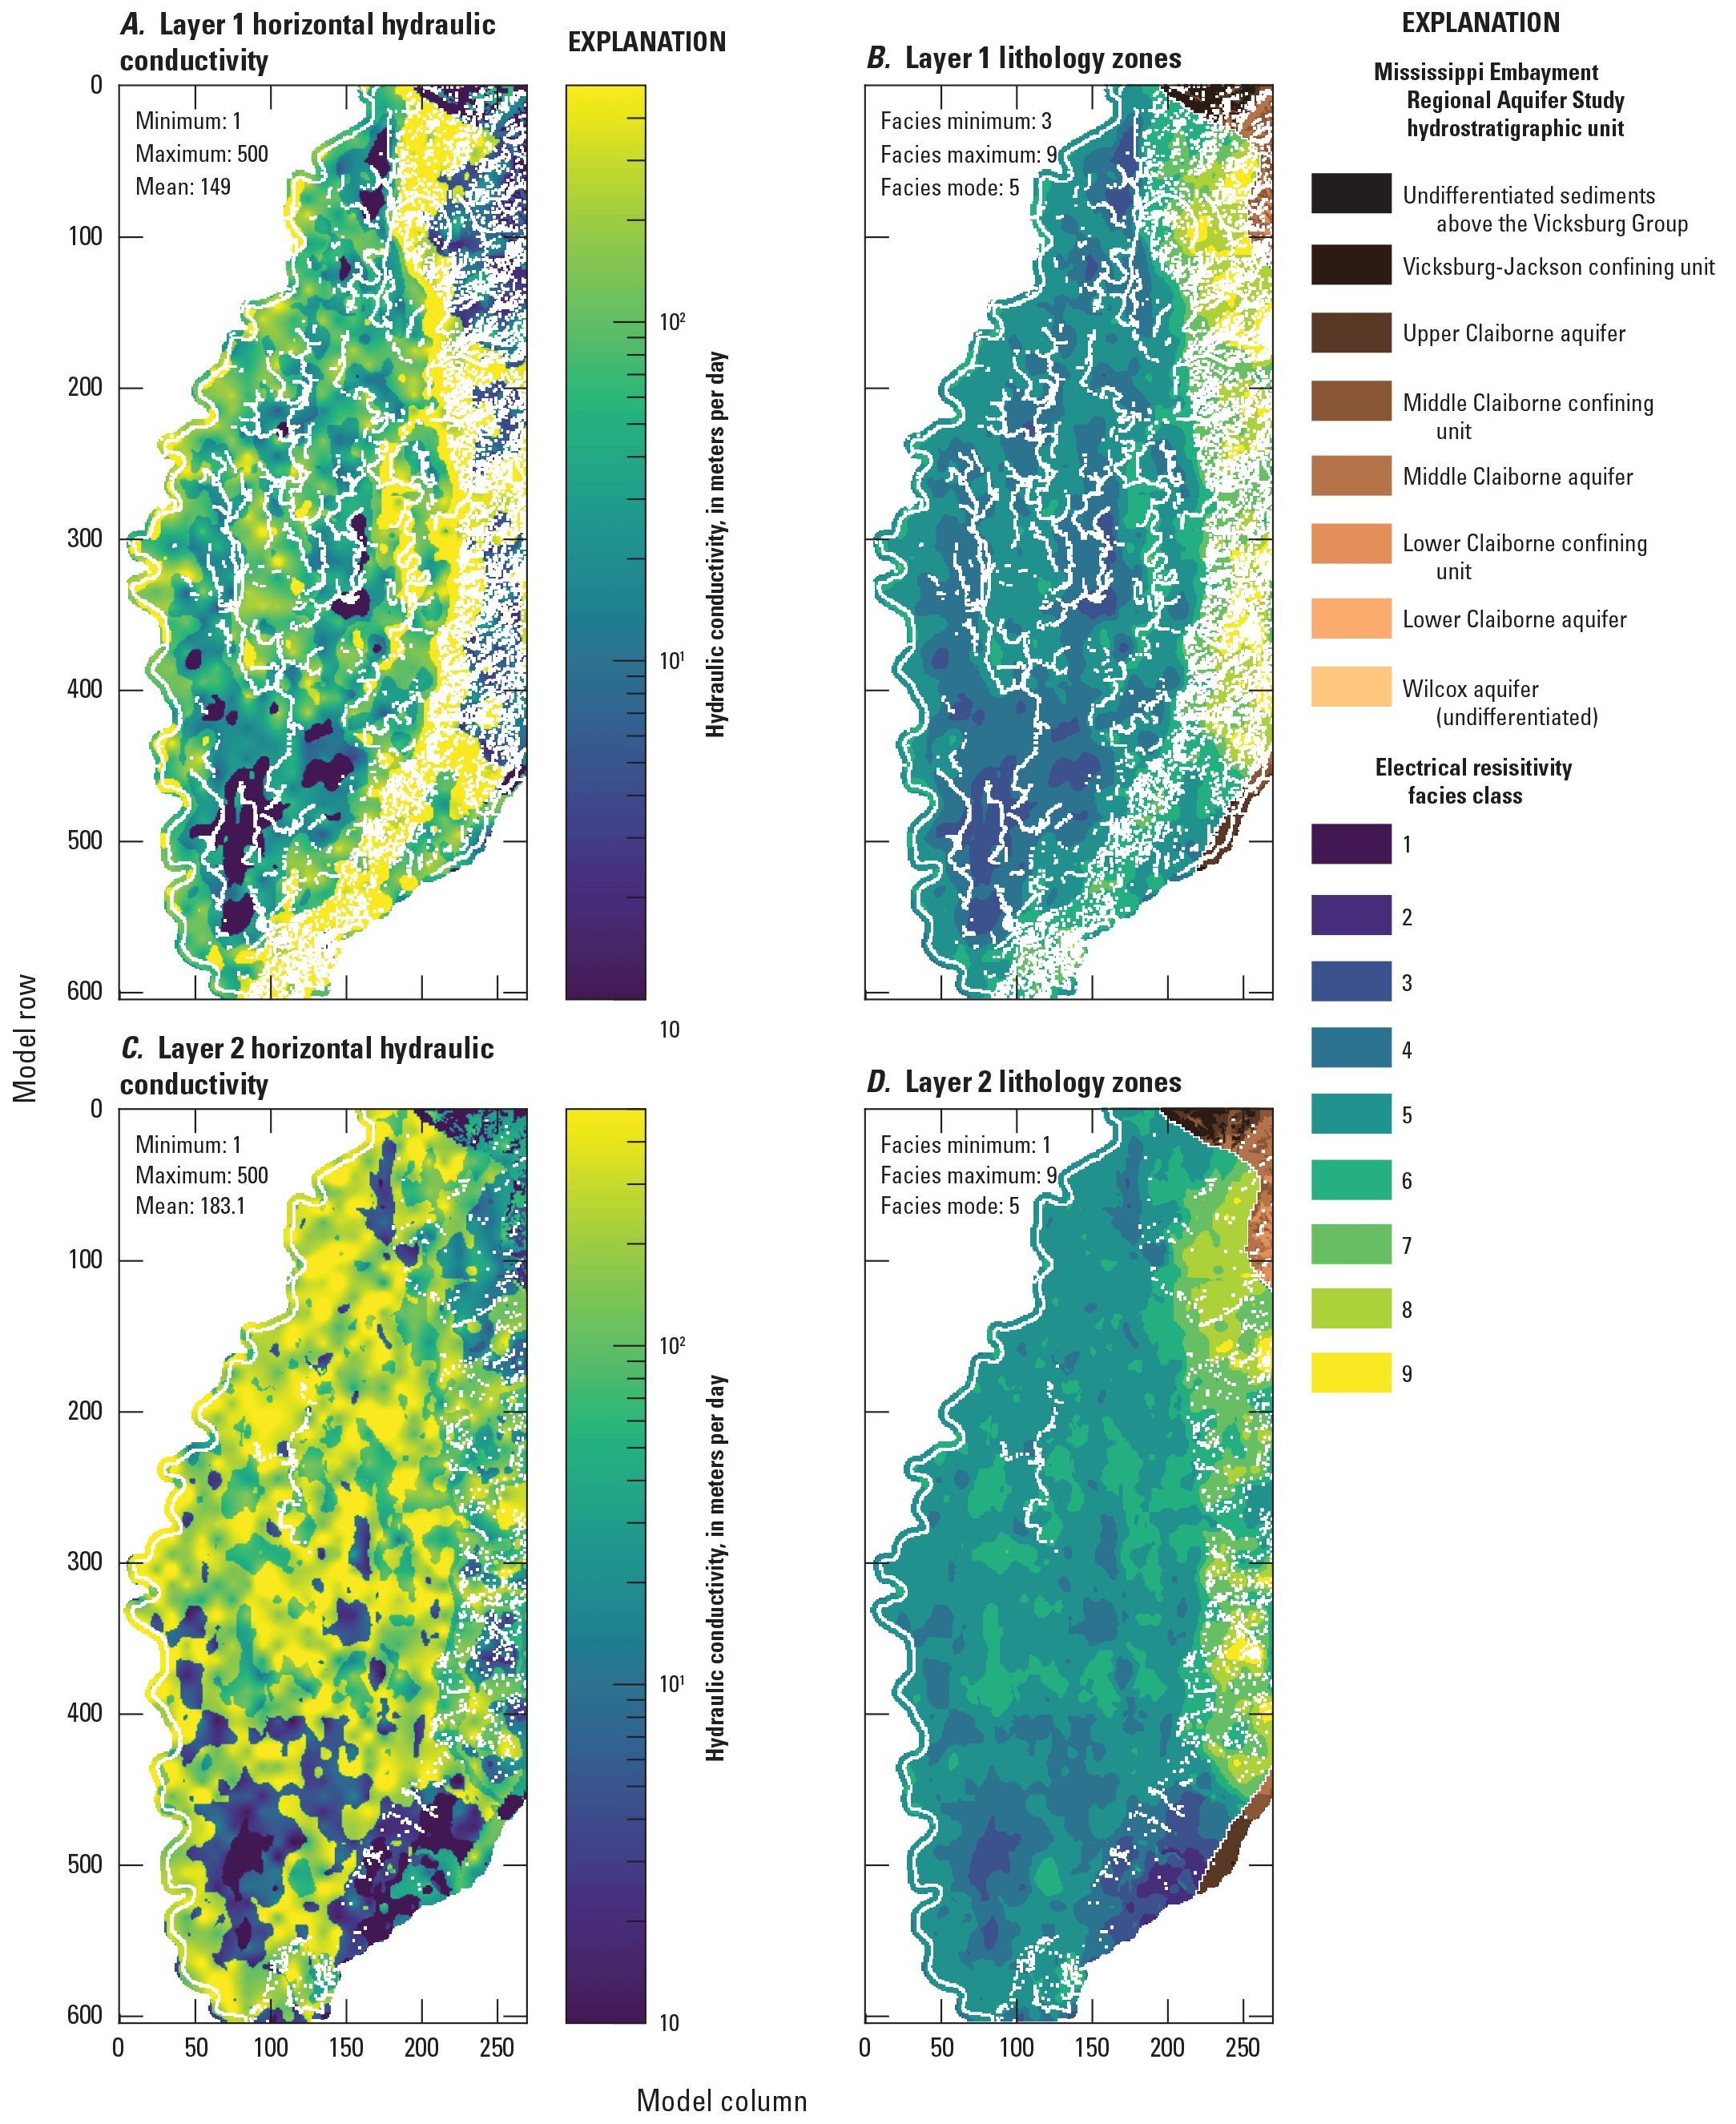 Values in the alluvial aquifer range from 1 to 500 meters per day, with mean values
                     in individual layers ranging from about 44 to 180 meters per day. Values in the upper
                     part of the Tertiary units covered by the AEM survey range from 1 to 500 meters per
                     day, with layer means ranging from about 10 to 66 meters per day.